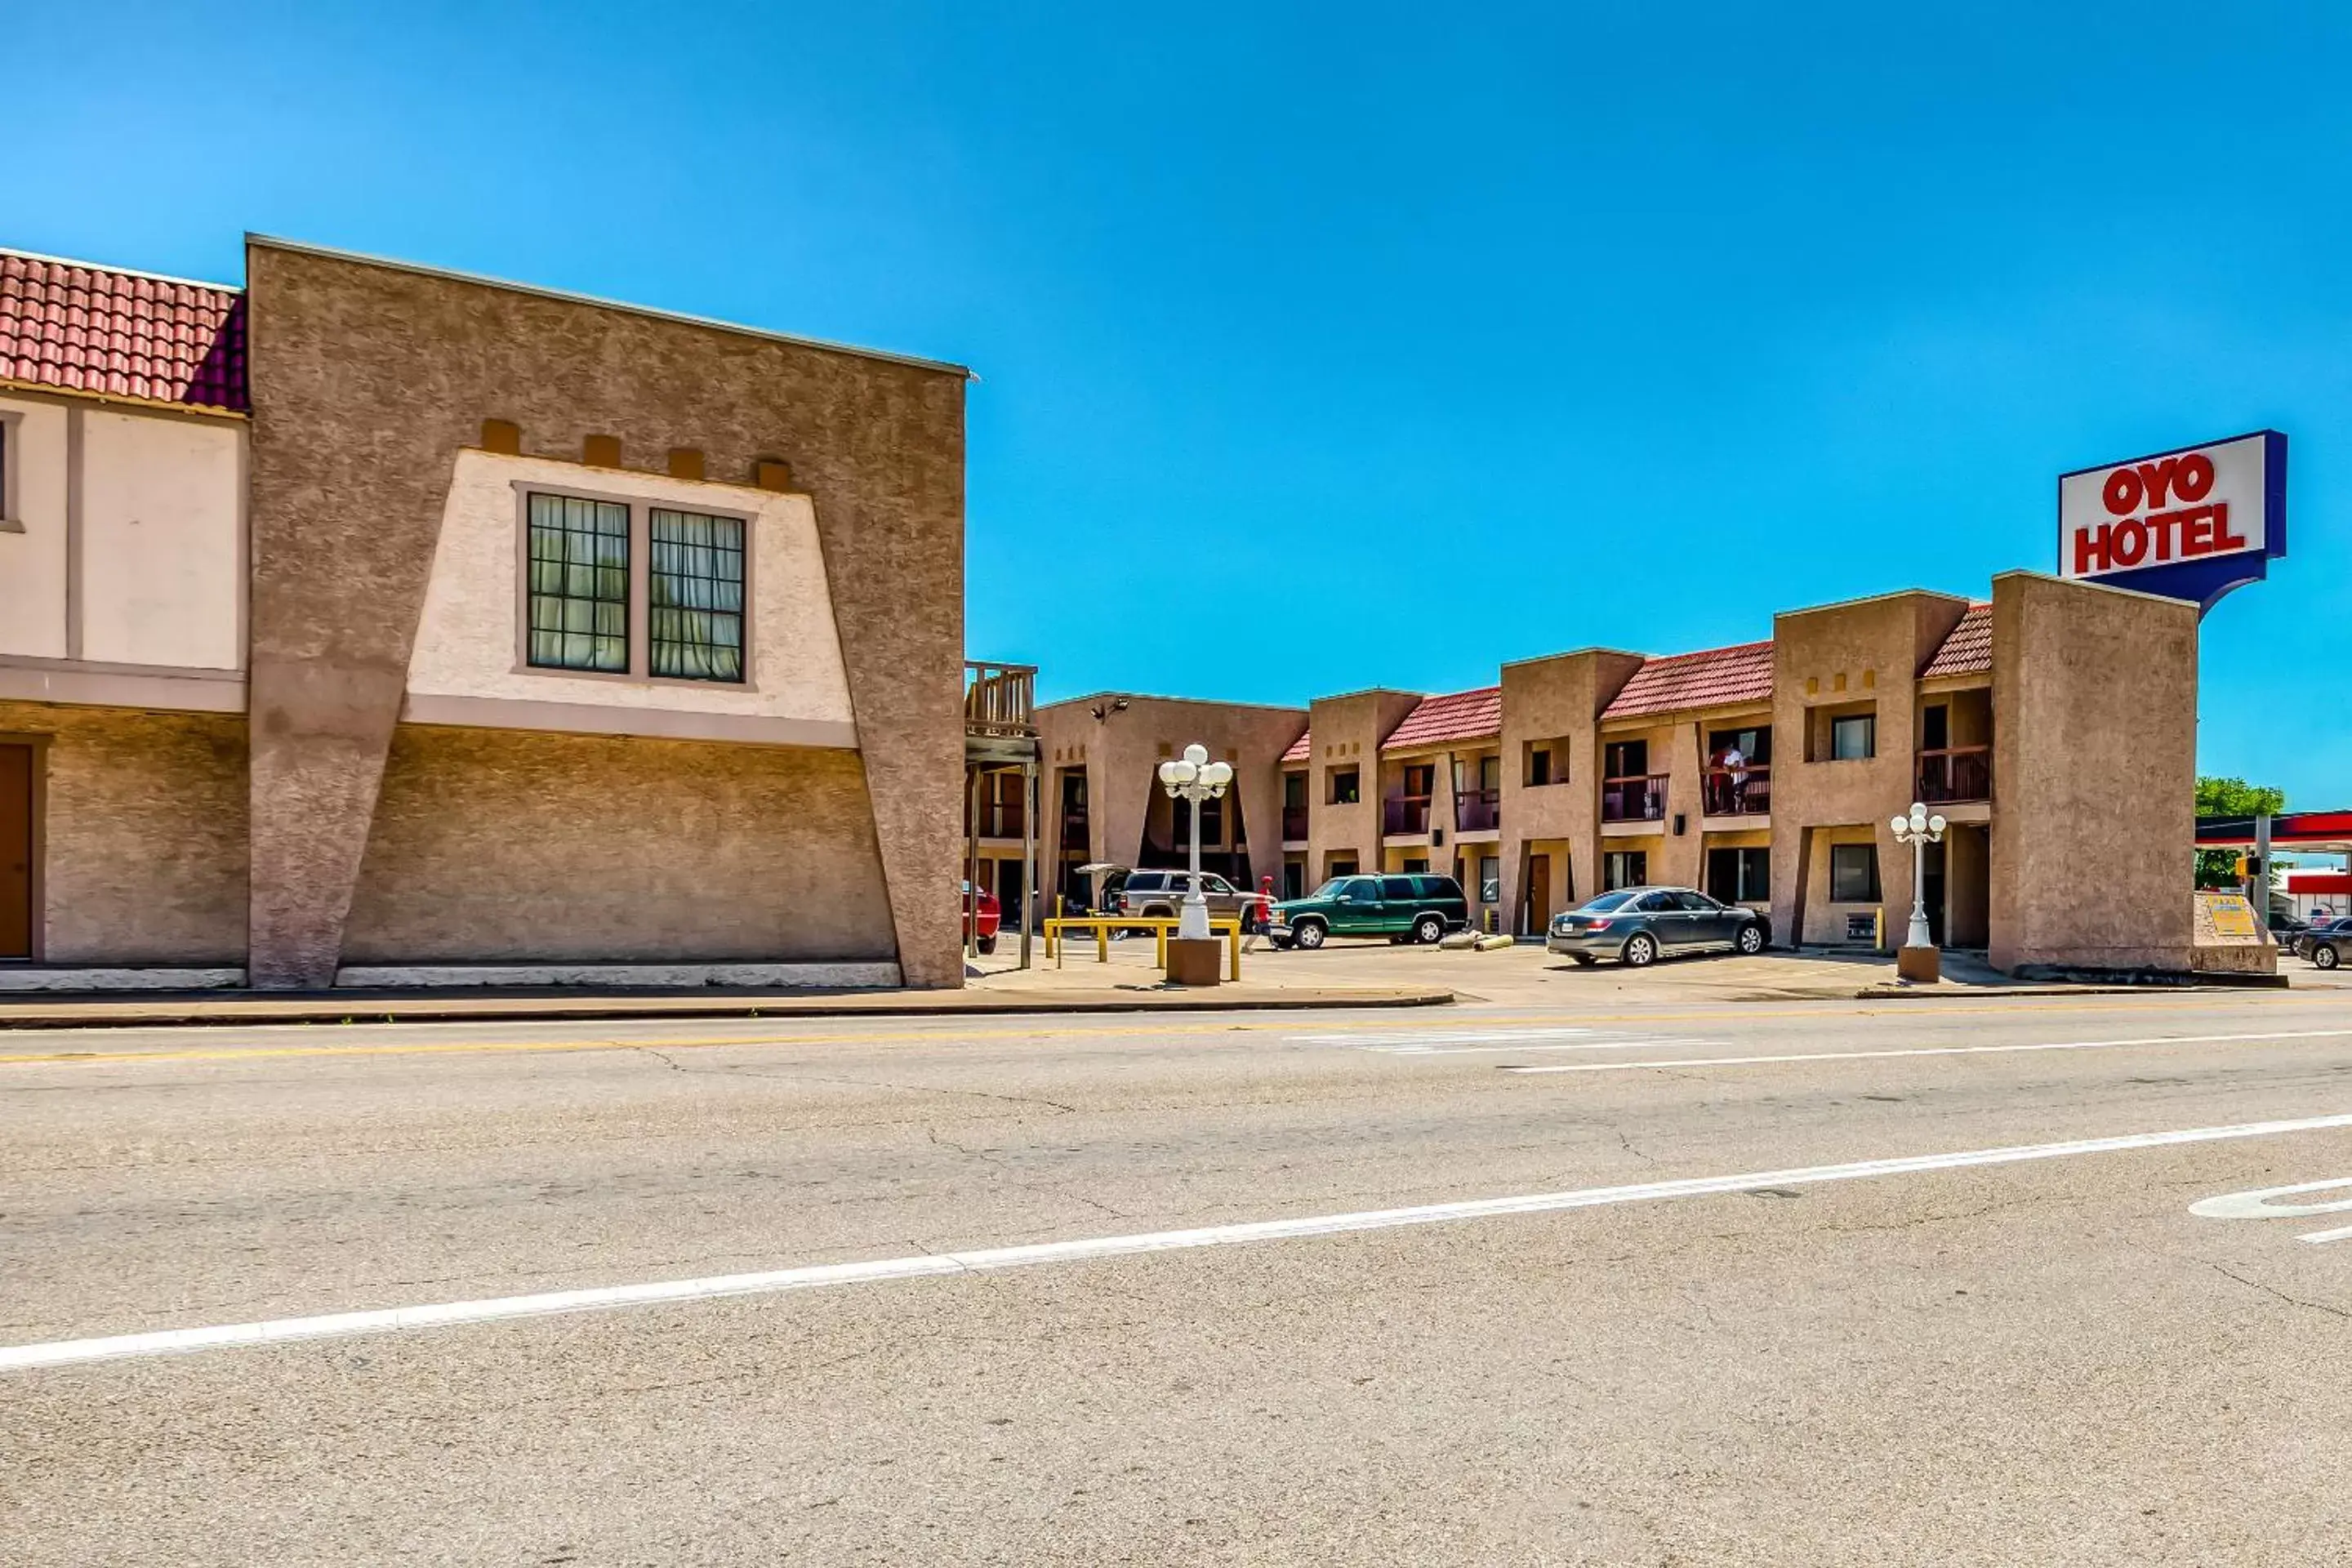 Parking, Property Building in OYO Hotel Groesbeck